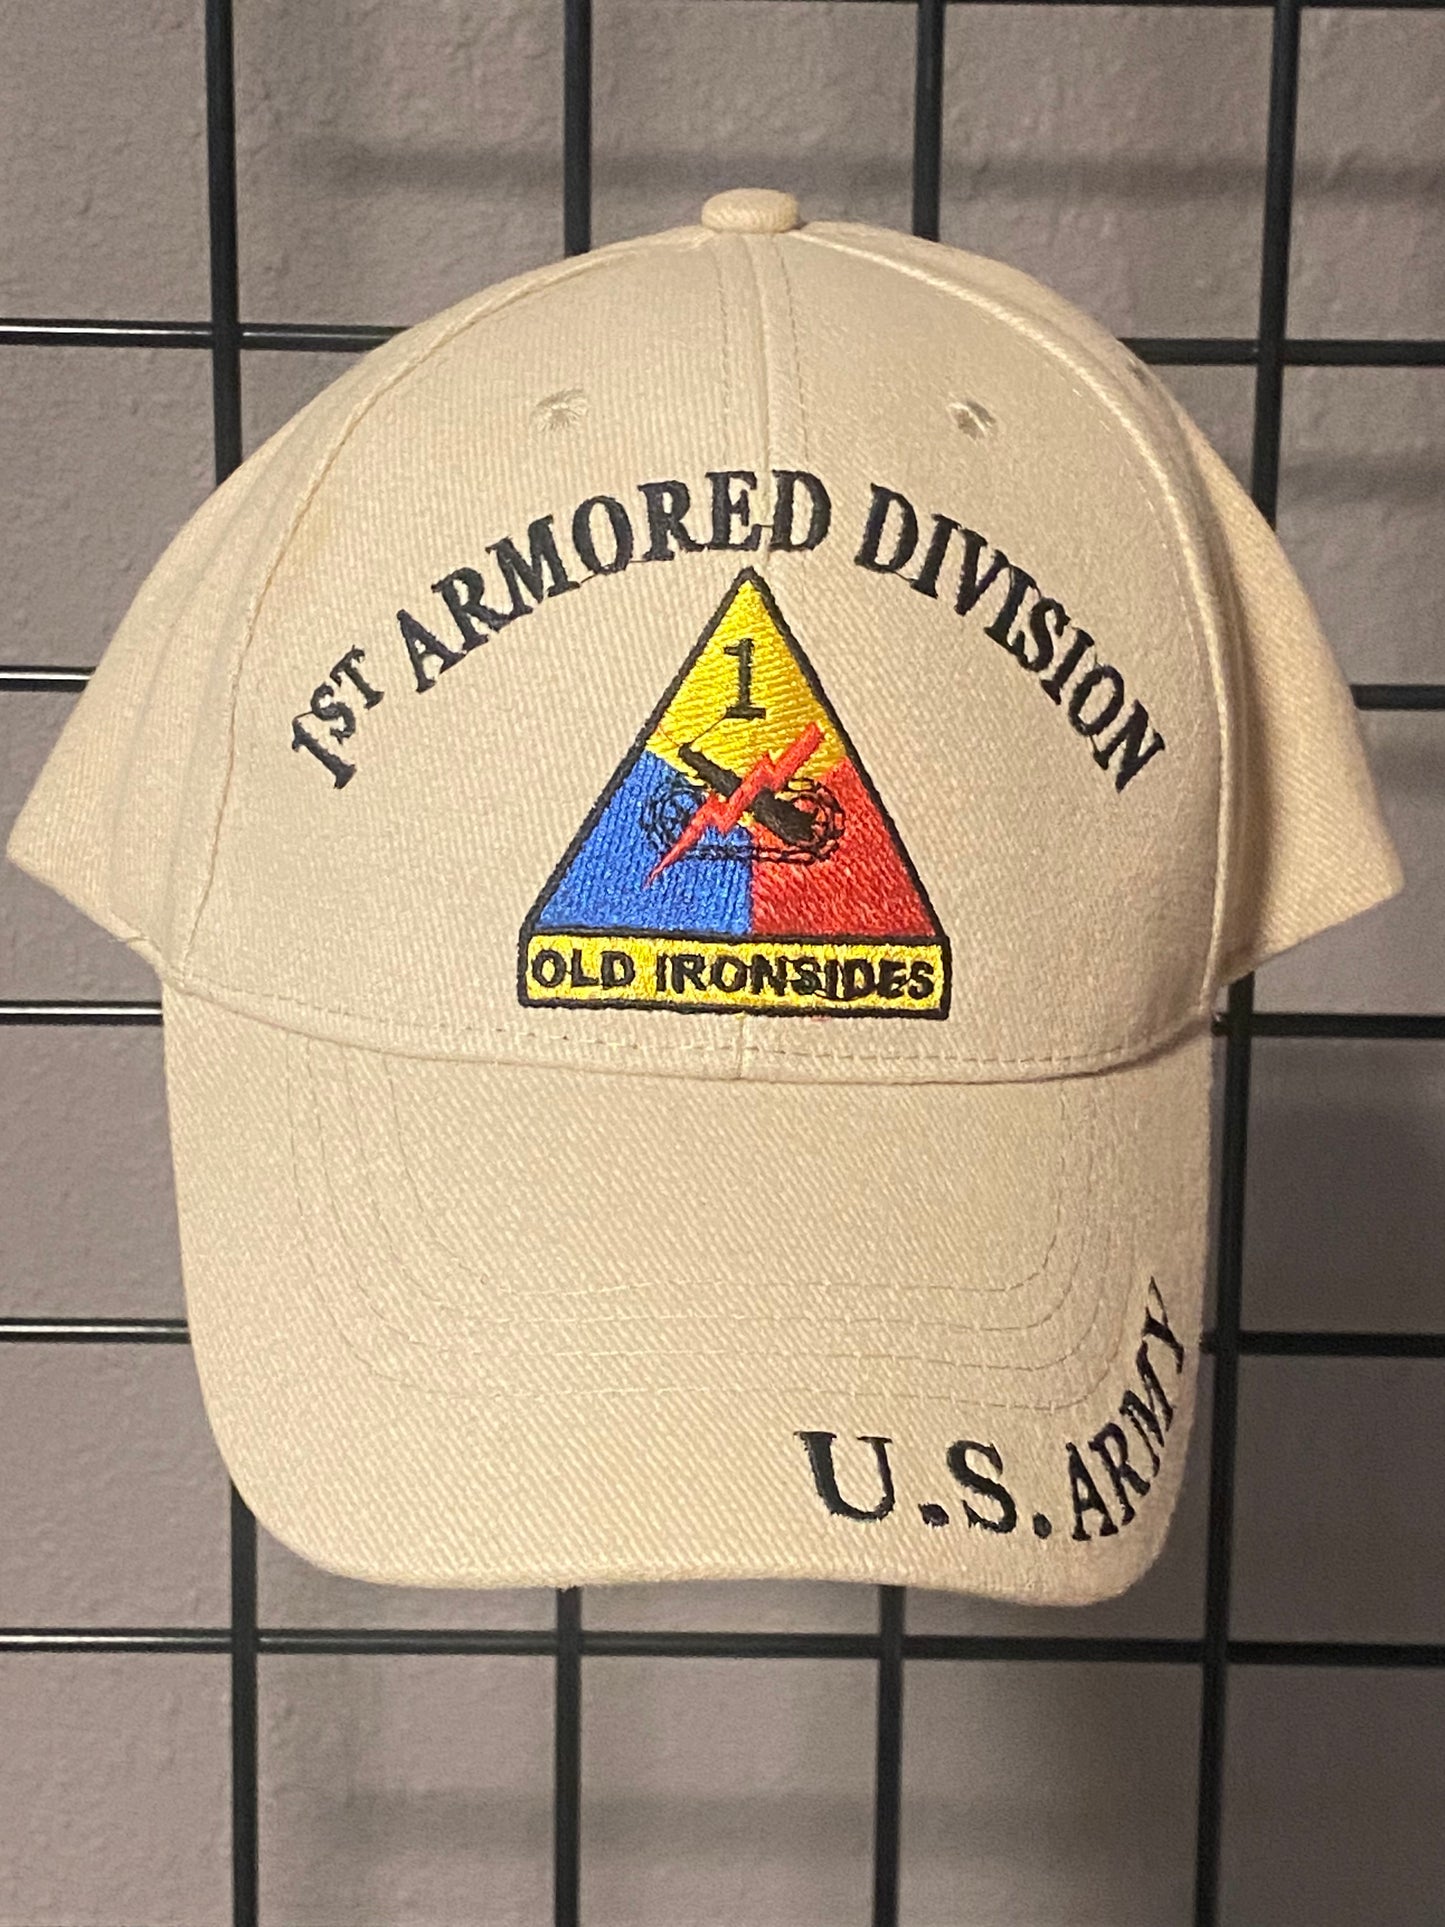 1st Armored Division US ARMY